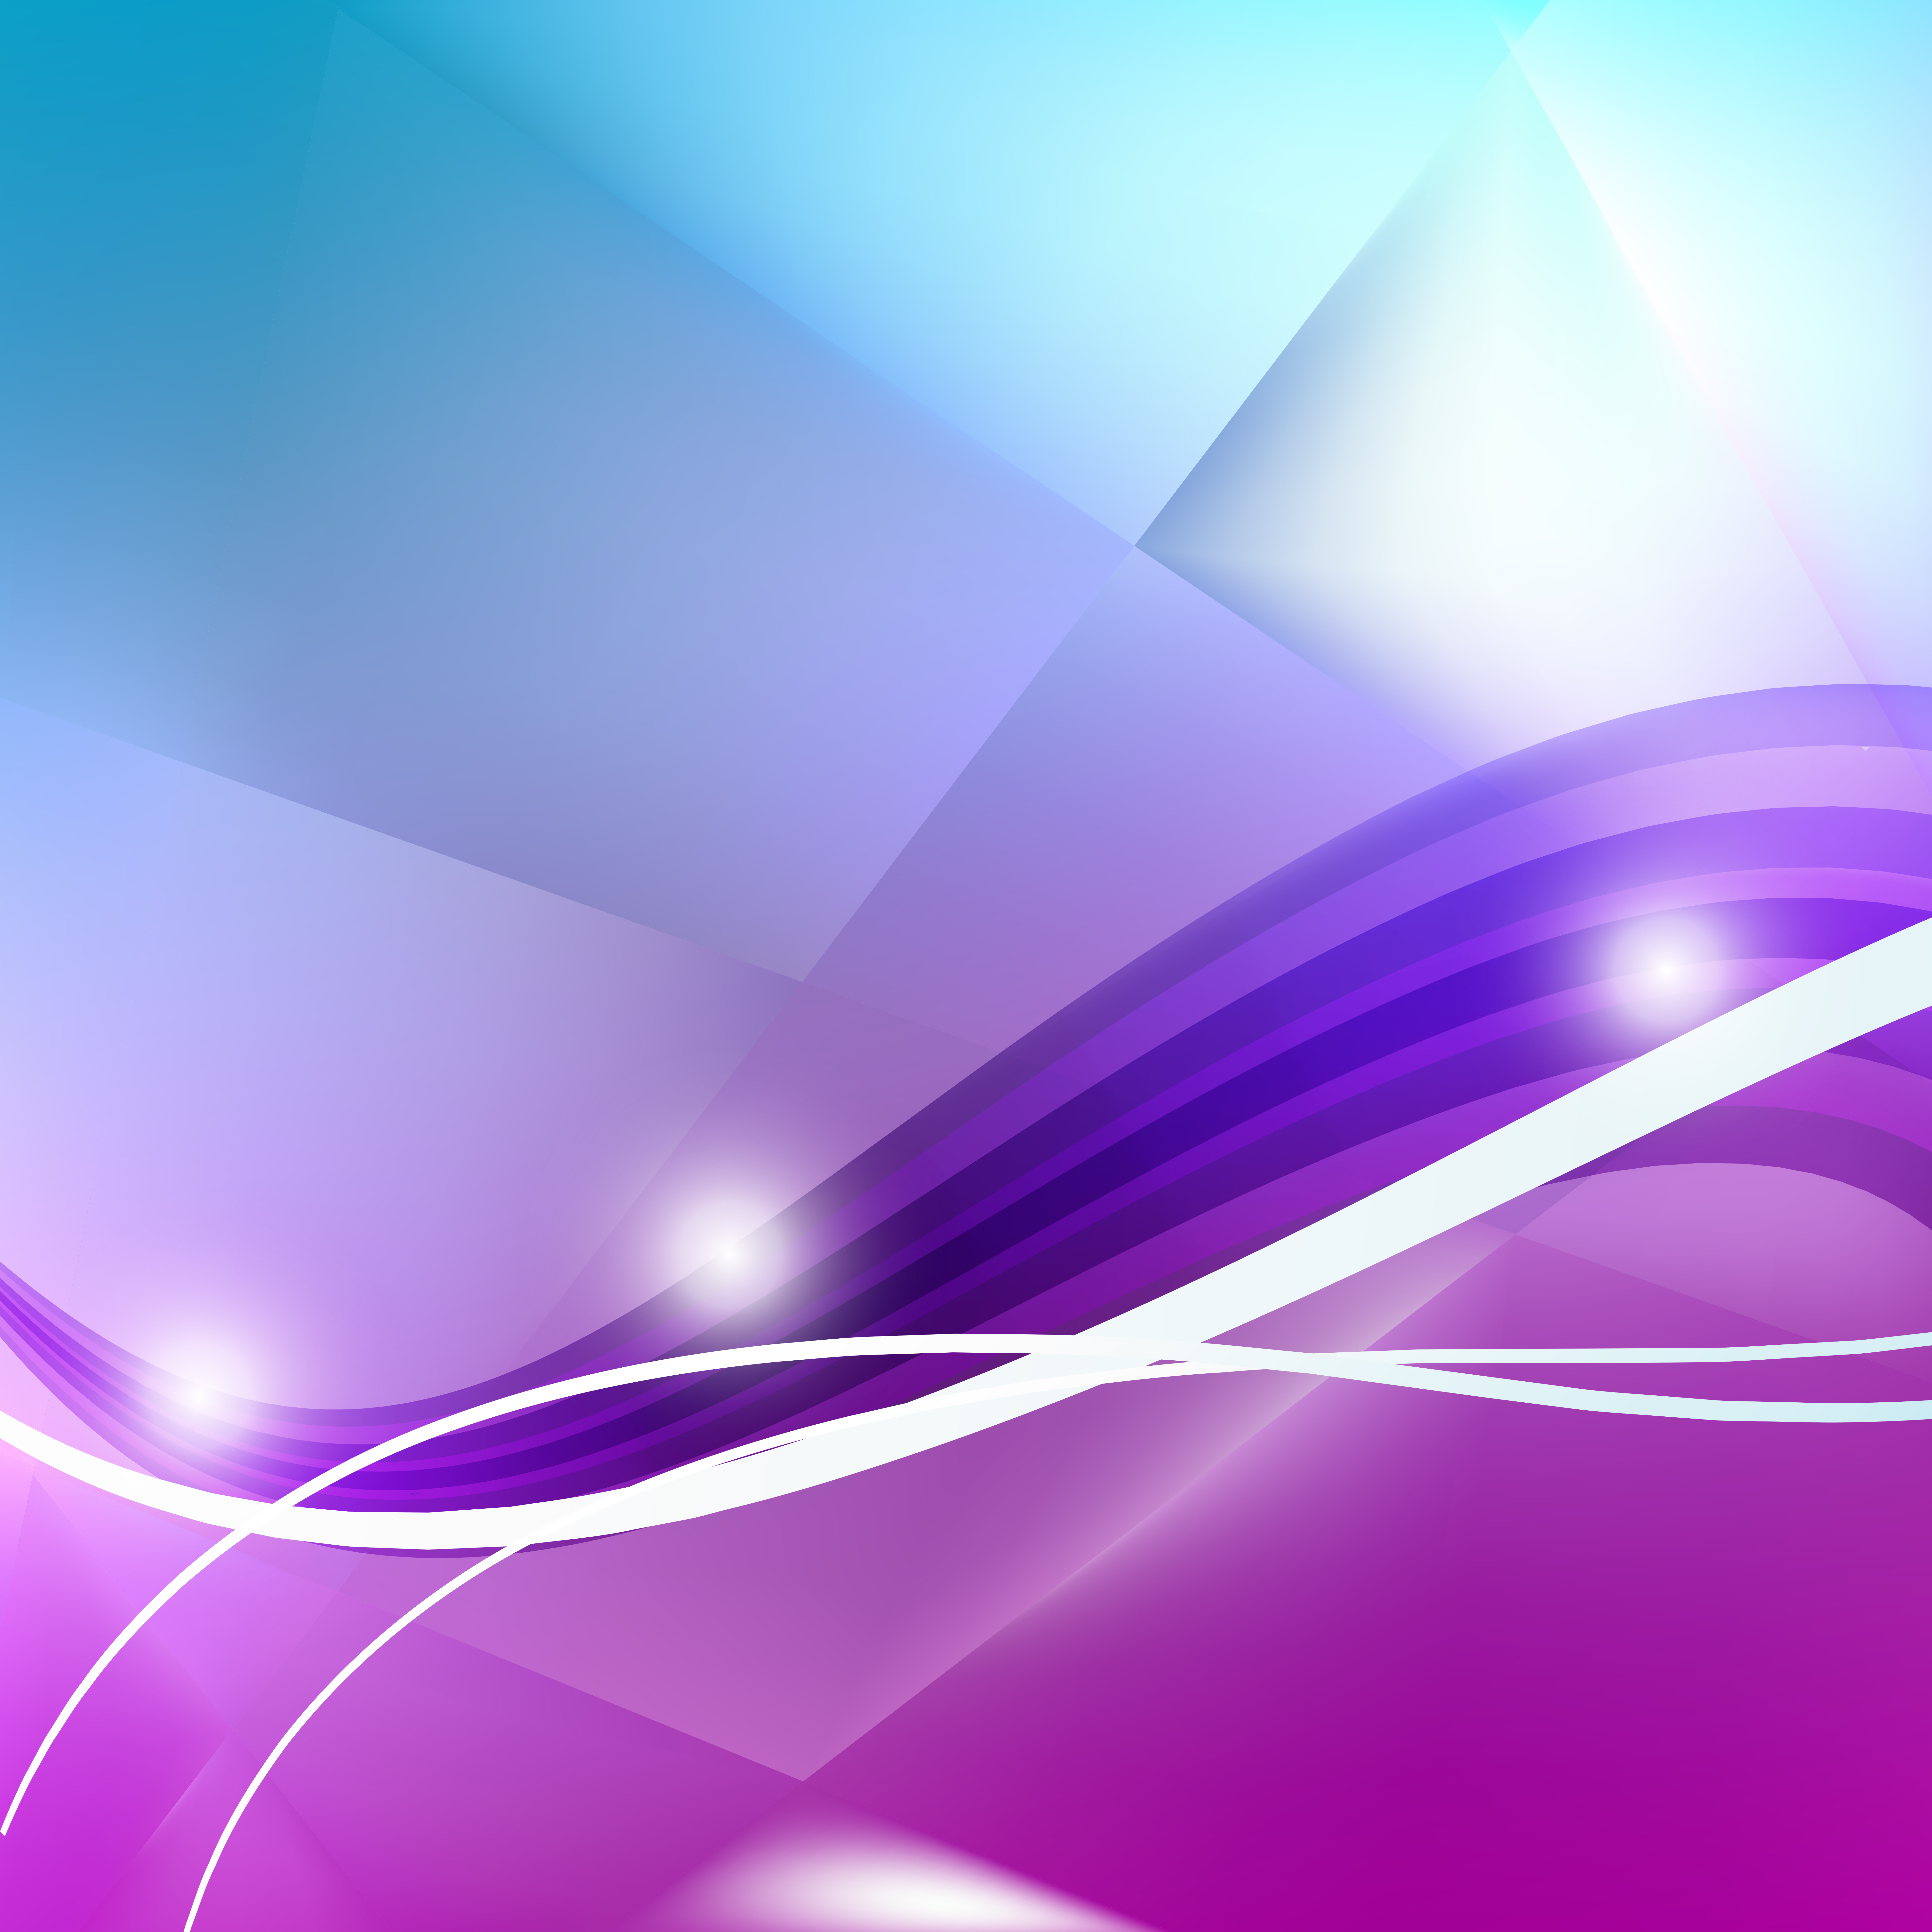 Free Abstract Blue Purple and White Background Vector Illustration